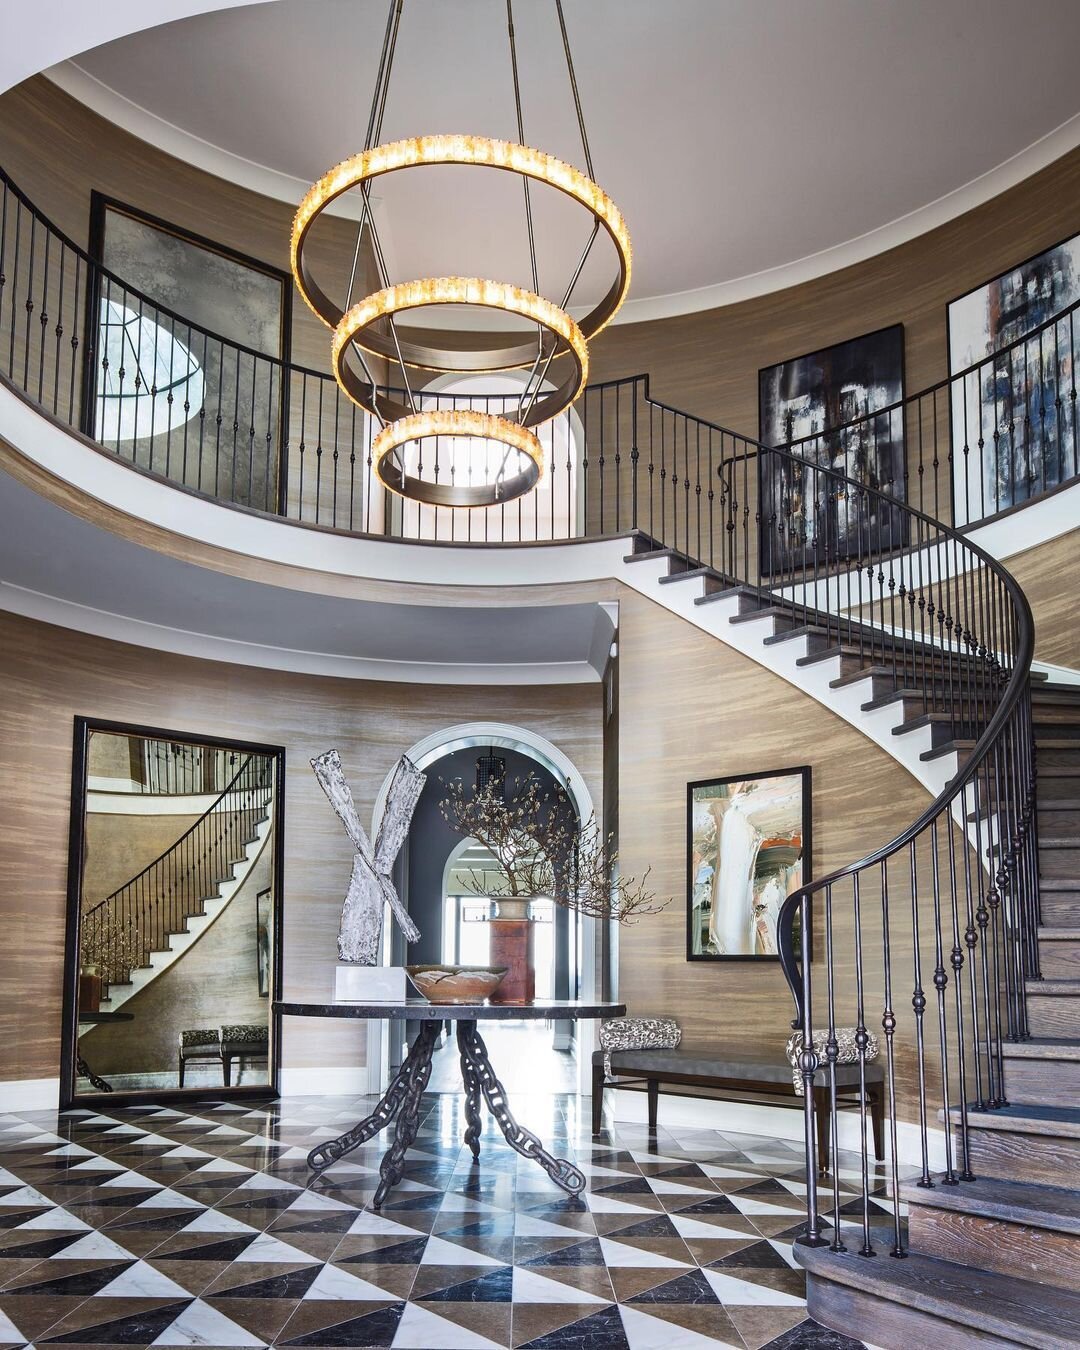 Breathtaking #GrandFoyer Designed by @jeffandrewsdsgn! 😍 #HomeInspo
----------------------------------⁠⁠⠀⠀ ⠀ ⠀
Interested in building your dream home? Contact us! ⠀
☎️: (416) 816-4313 ⠀ ⠀ ⠀ ⠀
✉️: info@prestigecustomhome.com ⠀ ⠀
---------------------